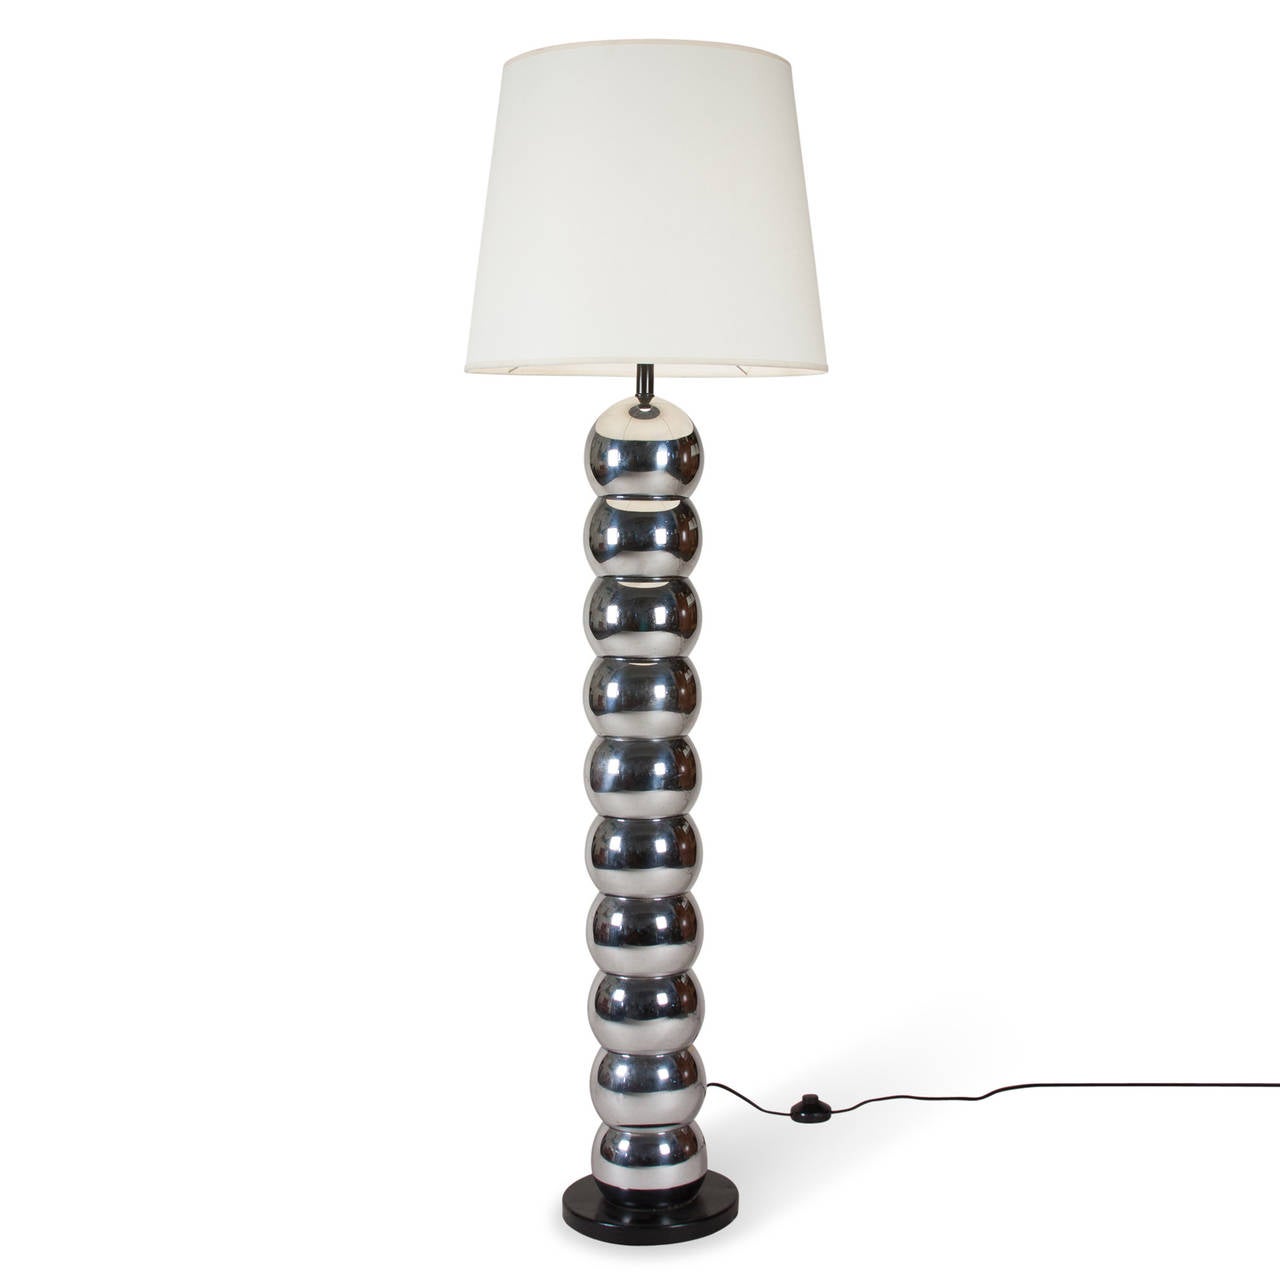 Mid-20th Century Chrome Bubble Floor Lamp, American, 1960s For Sale